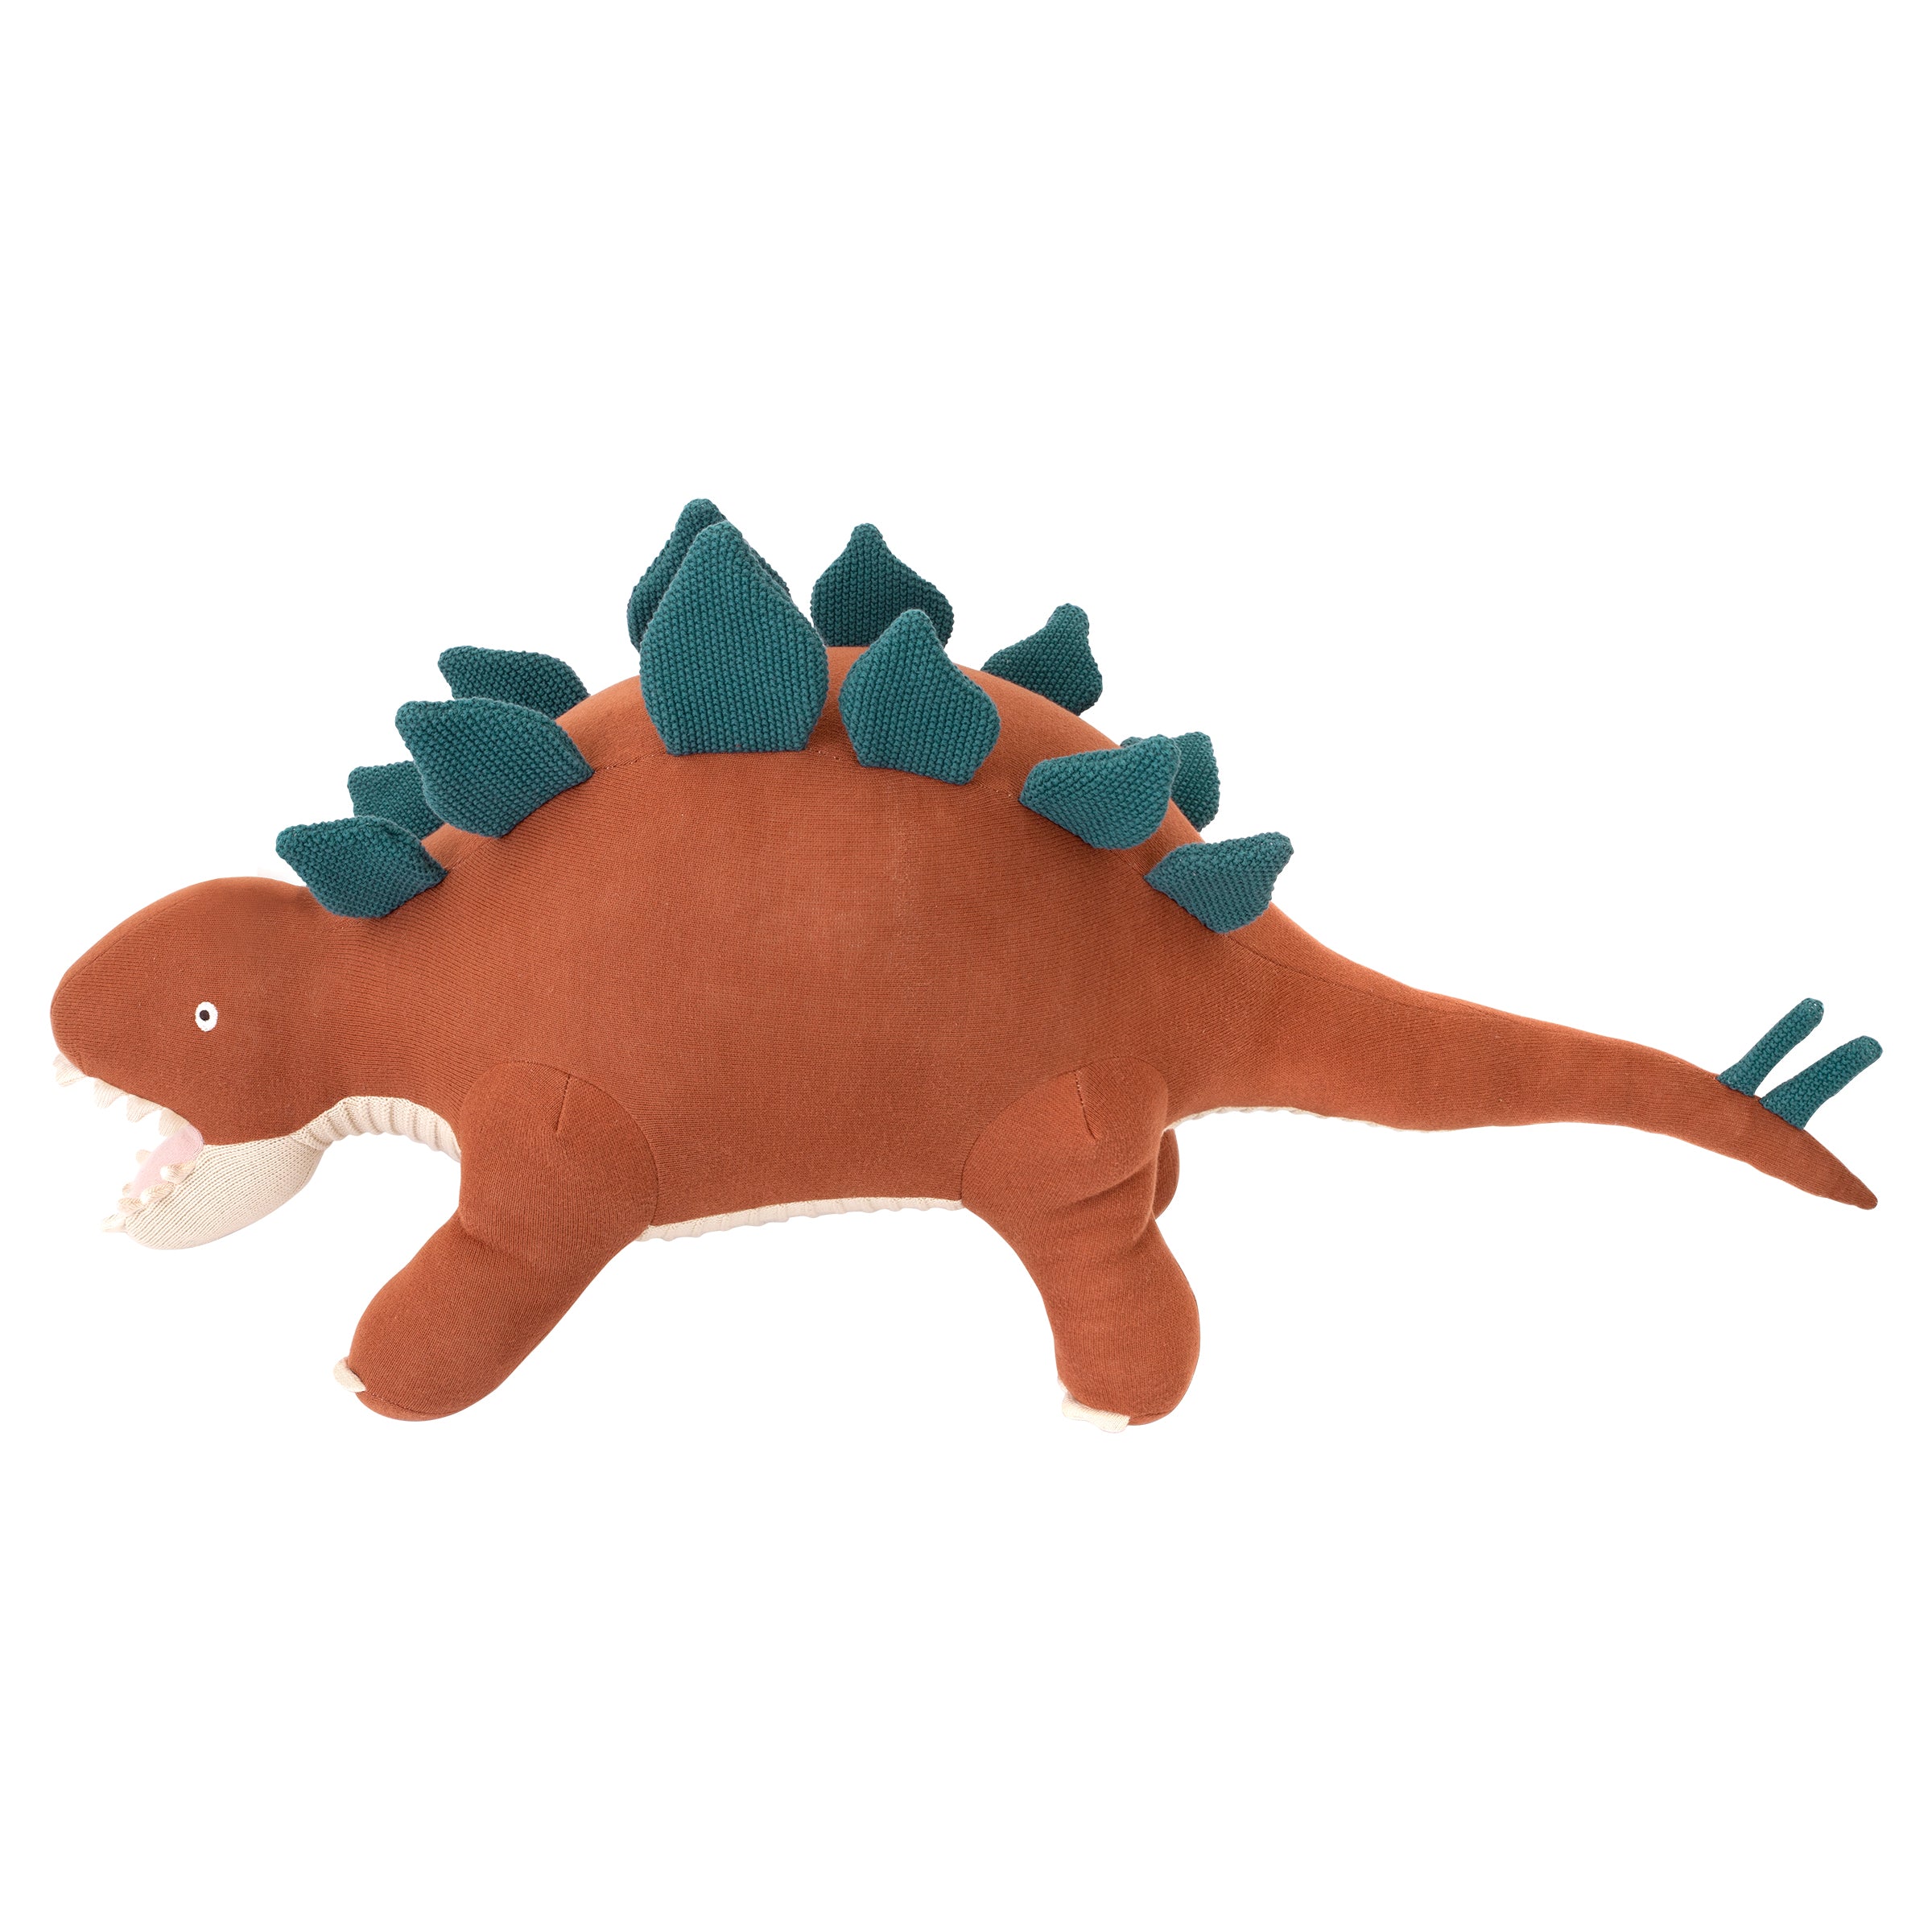 Bruce the stegosaurus toy is a fabulous kid's soft toy crafted from knitted organic cotton.